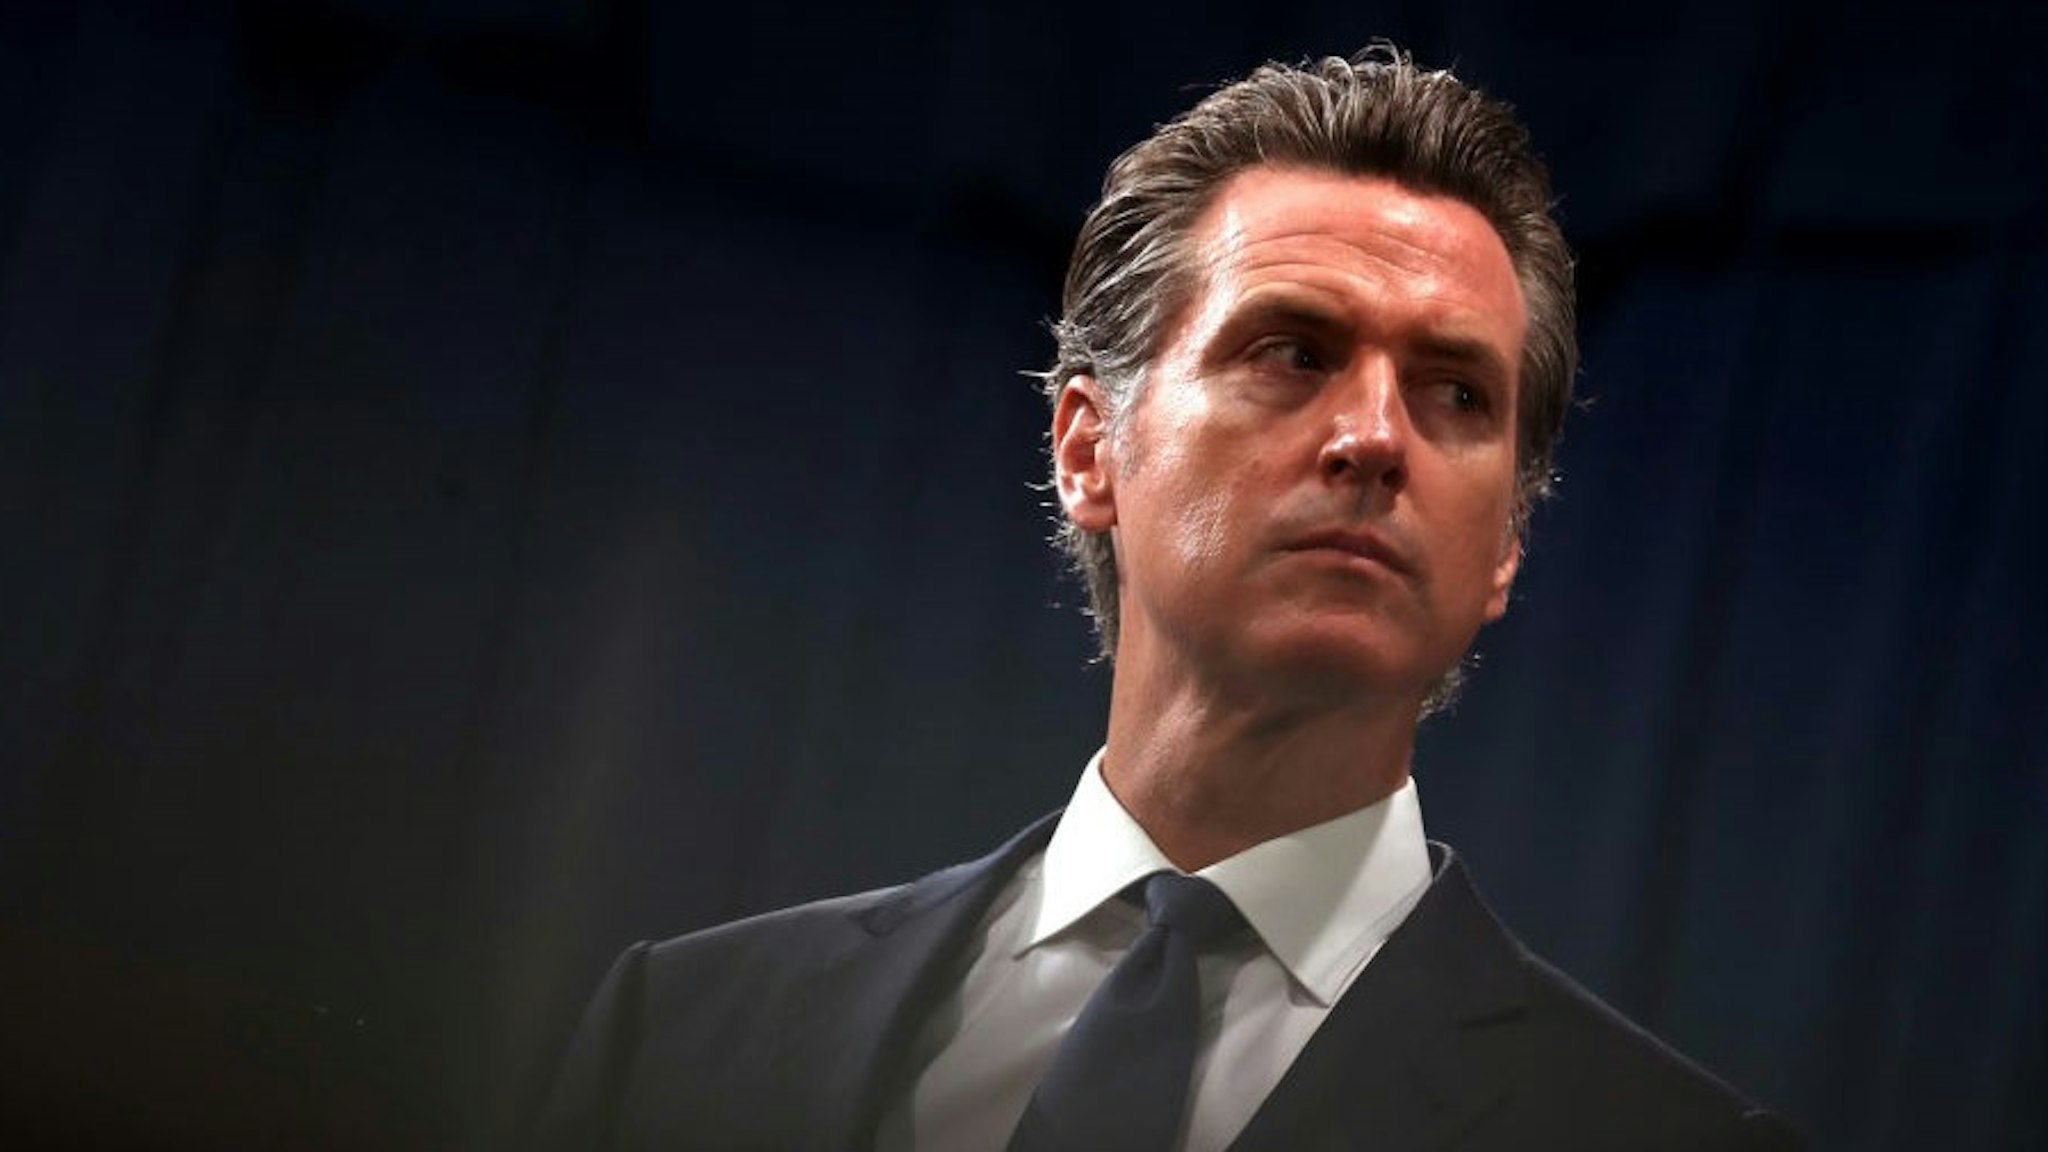 SACRAMENTO, CALIFORNIA - AUGUST 16: California Gov. Gavin Newsom looks on during a news conference with California attorney General Xavier Becerra at the California State Capitol on August 16, 2019 in Sacramento, California. California attorney genera Xavier Becerra and California Gov. Gavin Newsom announced that the State of California is suing the Trump administration challenging the legality of a new "public charge" rule that would make it difficult for immigrants to obtain green cards who receive public assistance like food stamps and Medicaid. (Photo by